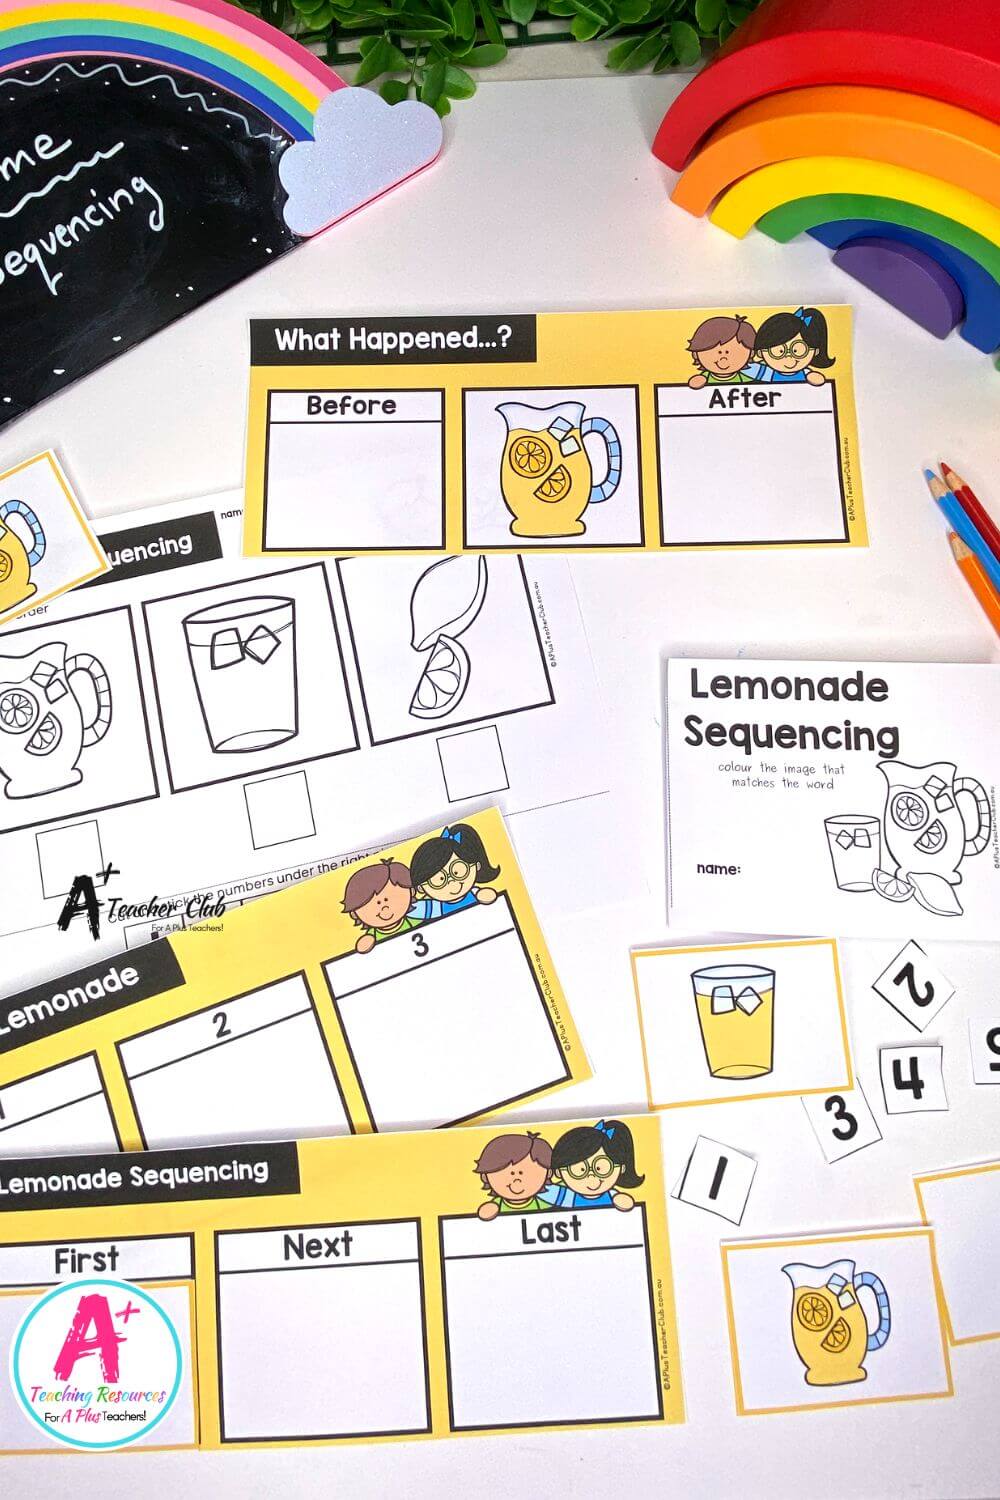 3-Step Sequencing Everyday Events - Make Lemonade Activities Pack